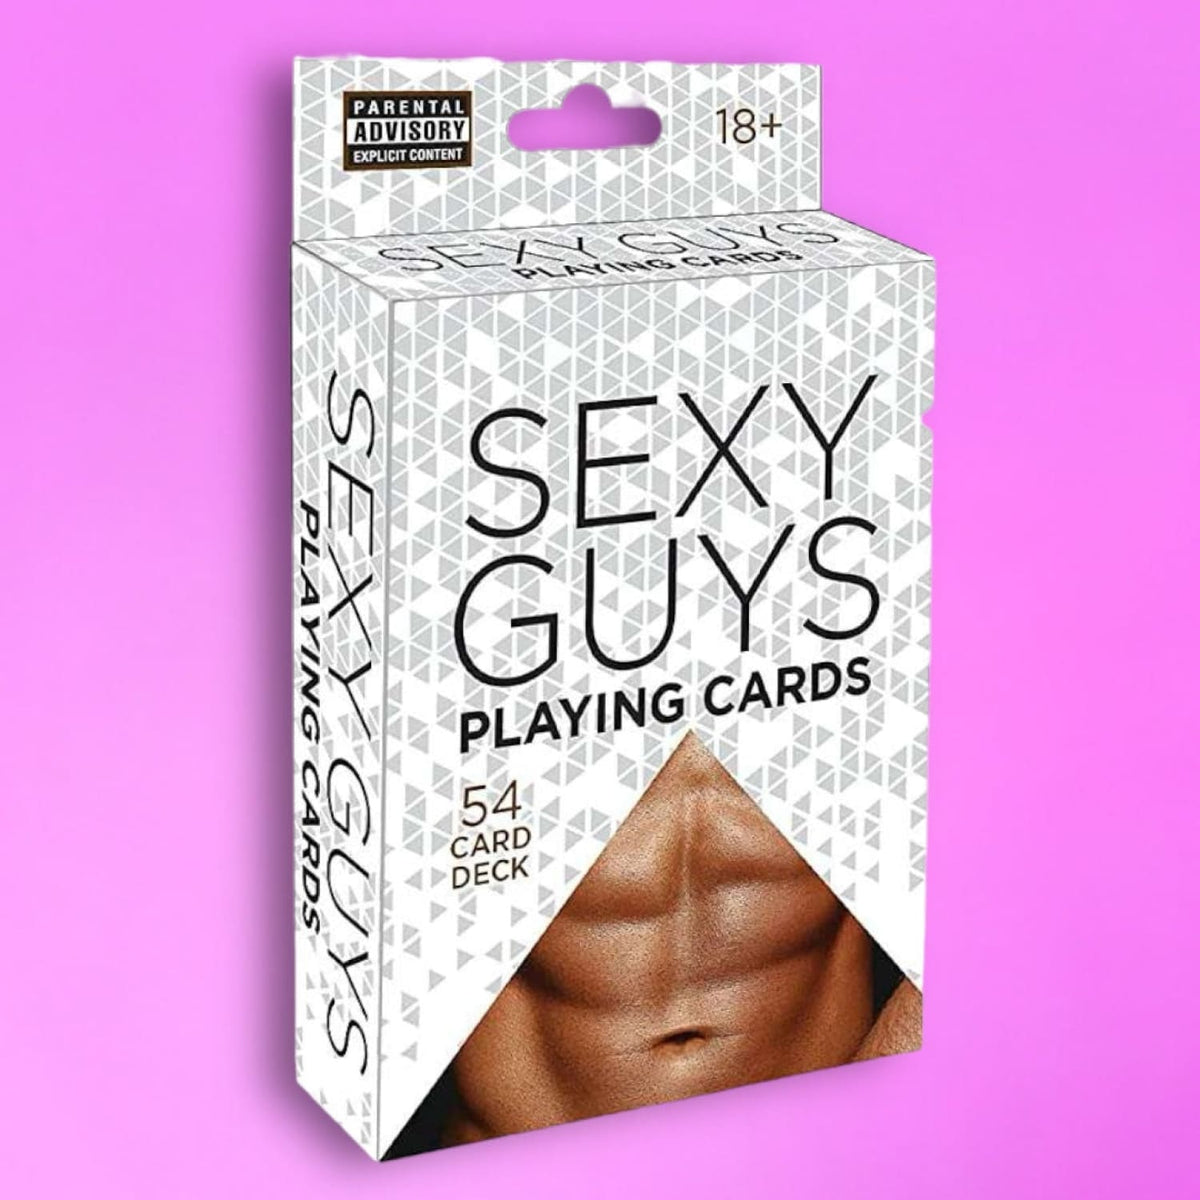 Sexy Guys Playing Cards Bachelorette Gifts - Gag Gift